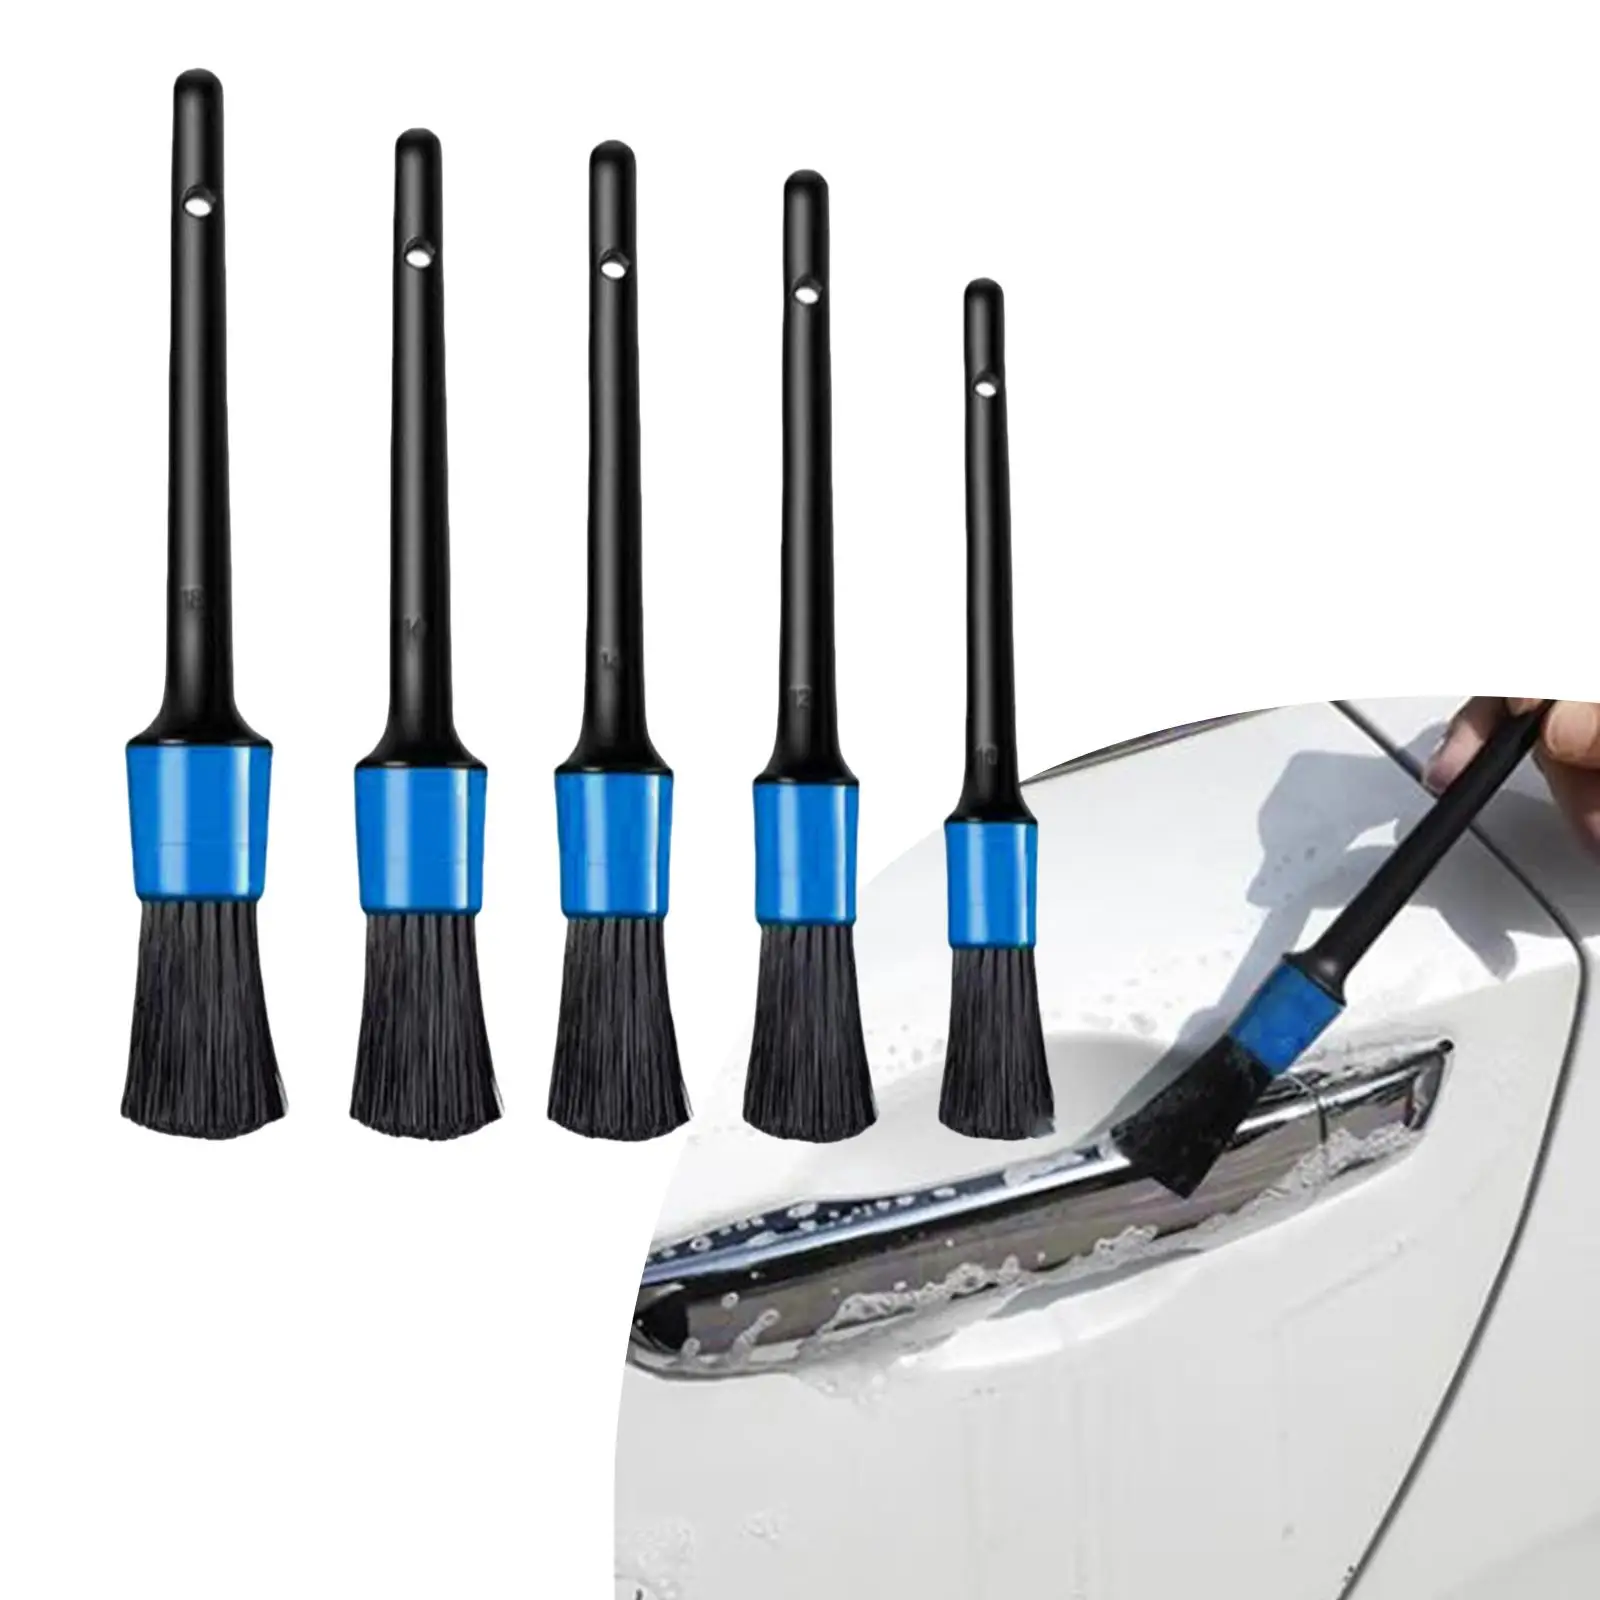 Car Detail Brush Set 5 Sizes Dry and Wet Use with Hanging Hole Convenient for Automotive Interior Exterior Flexible Versatile